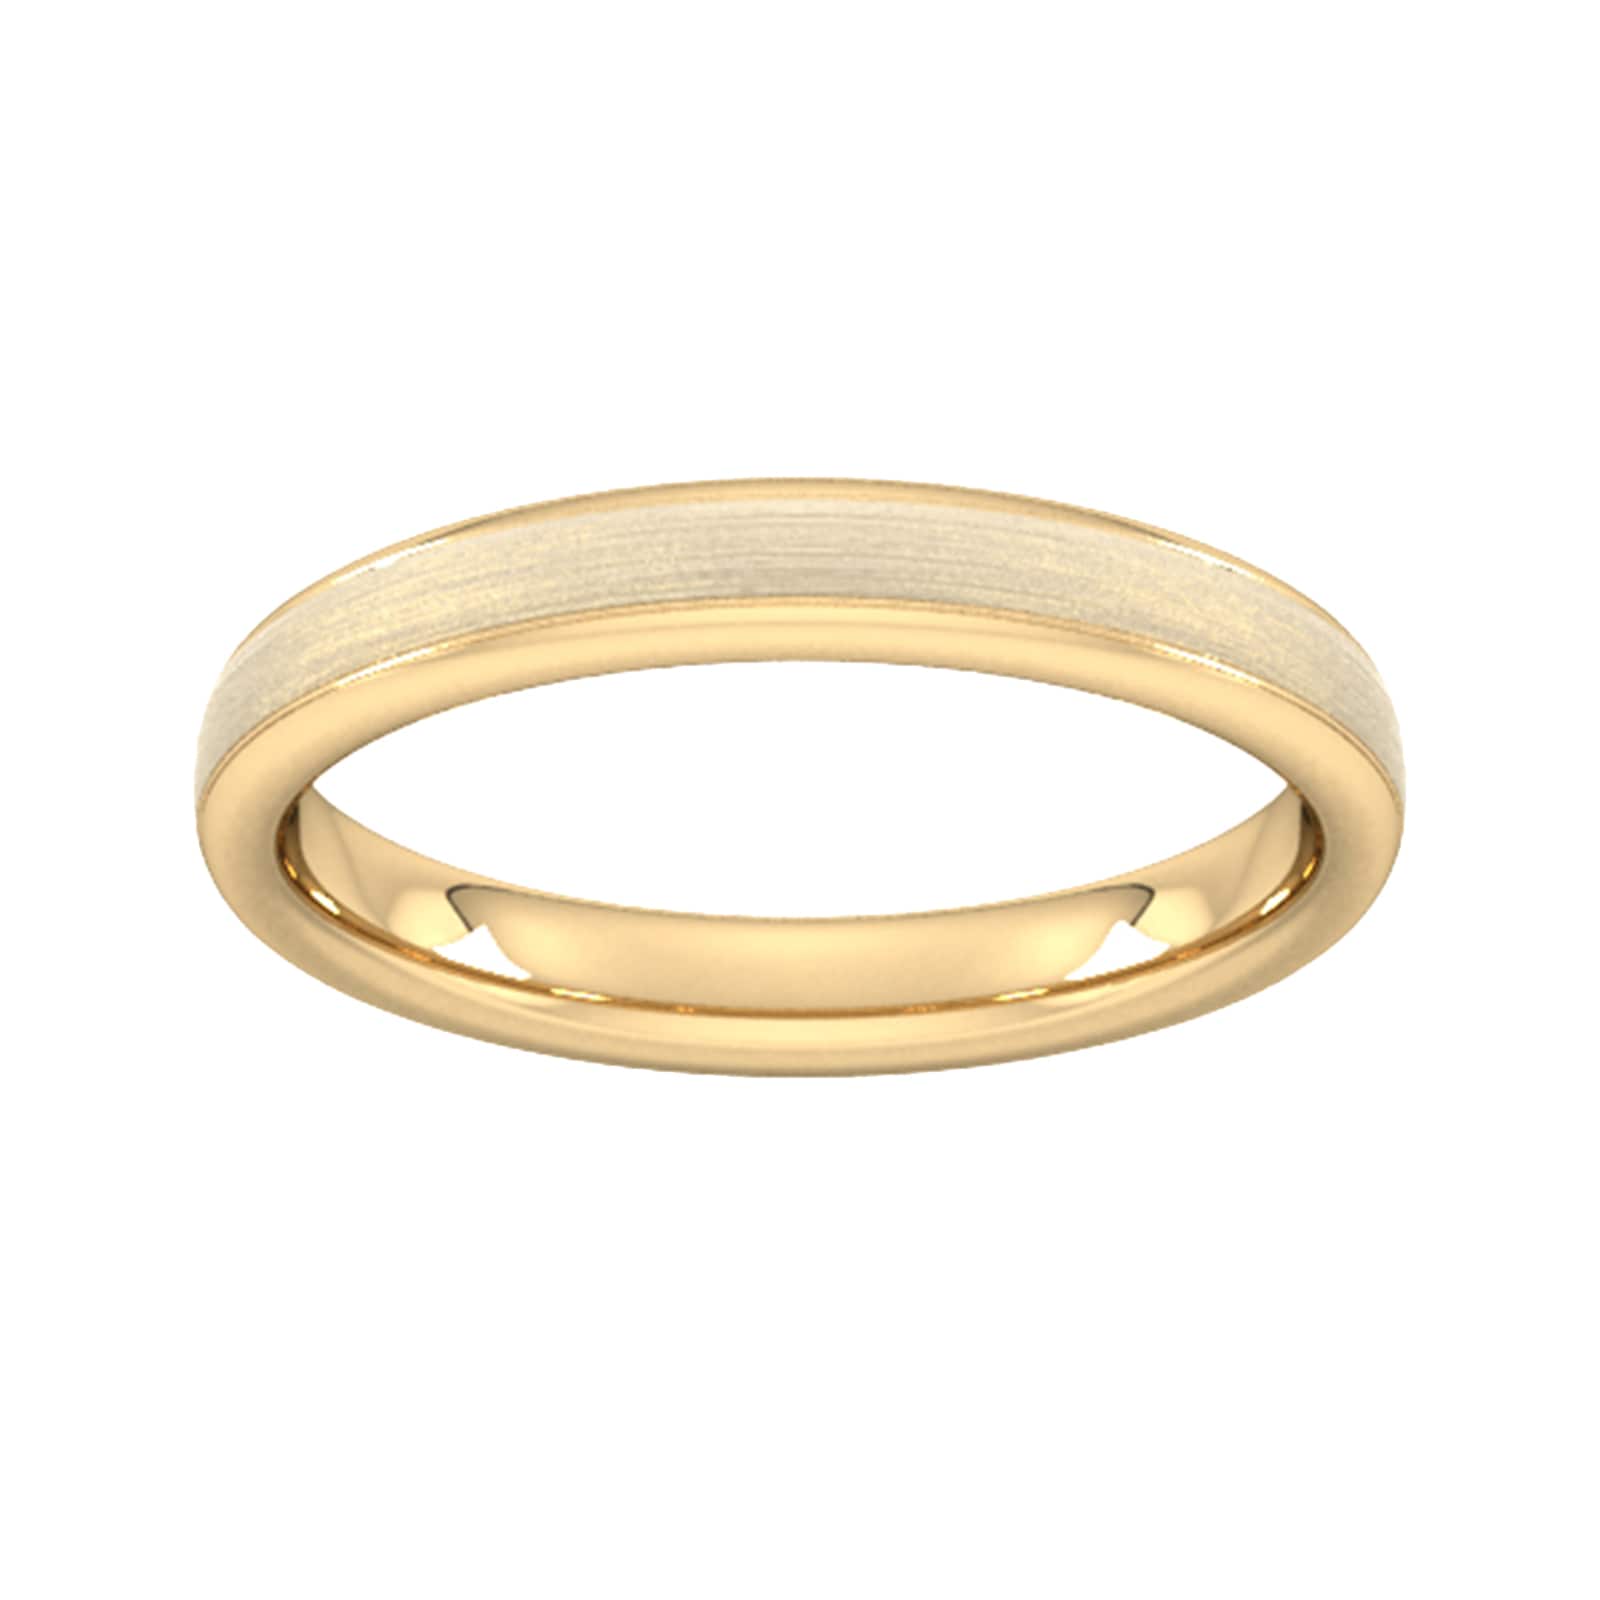 3mm Traditional Court Standard Matt Centre With Grooves Wedding Ring In 18 Carat Yellow Gold - Ring Size V